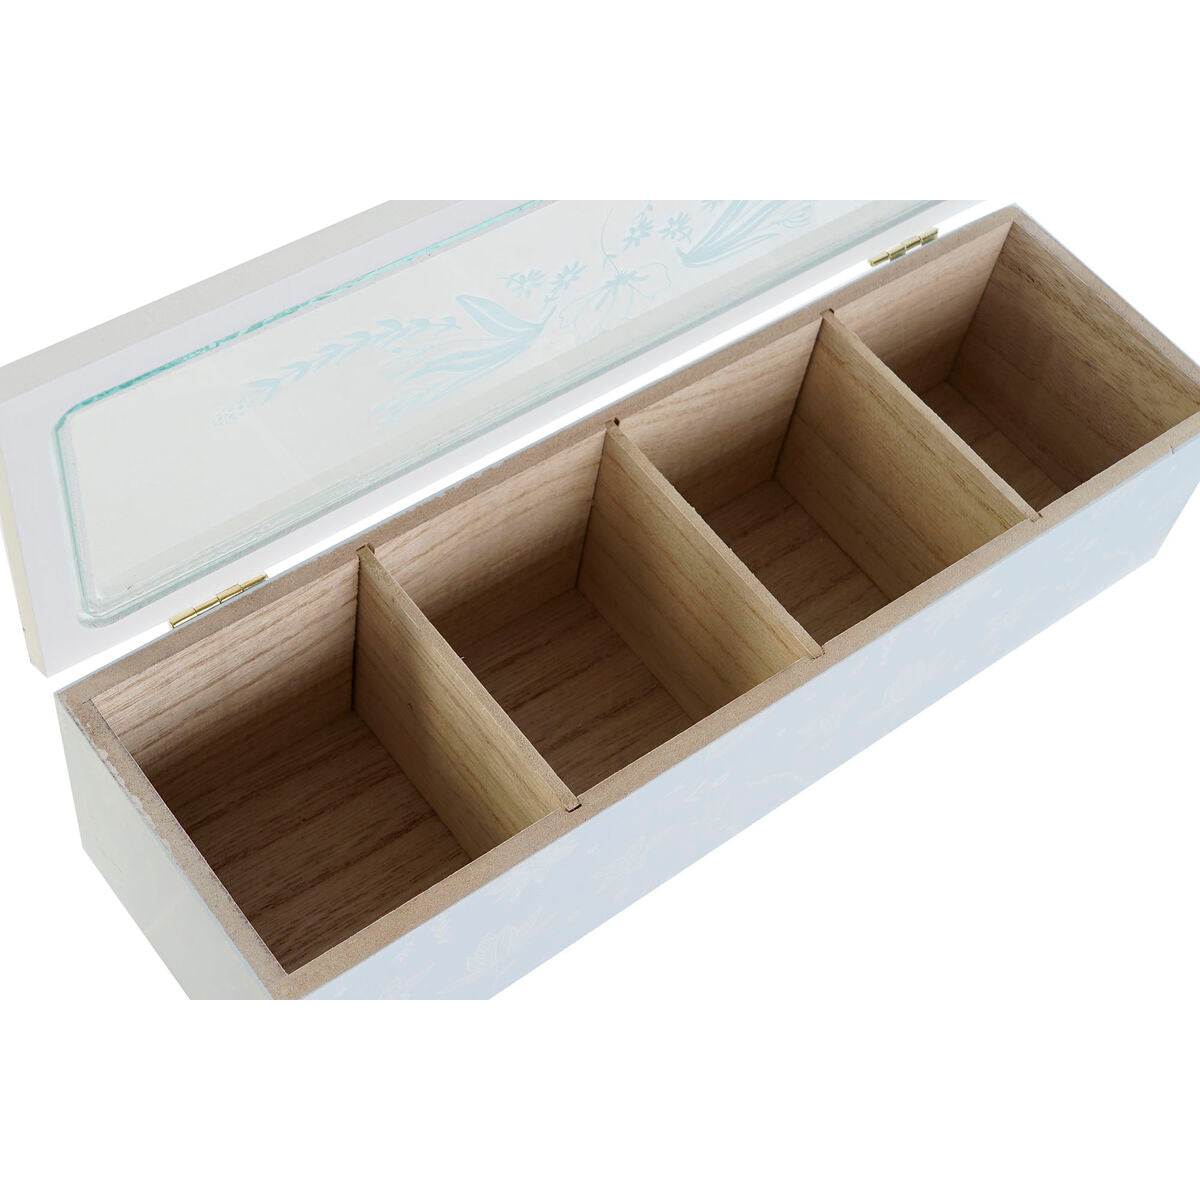 Box for Infusions DKD Home Decor Blauw Groen Lila Kristal Hout MDF (3 Stuks)